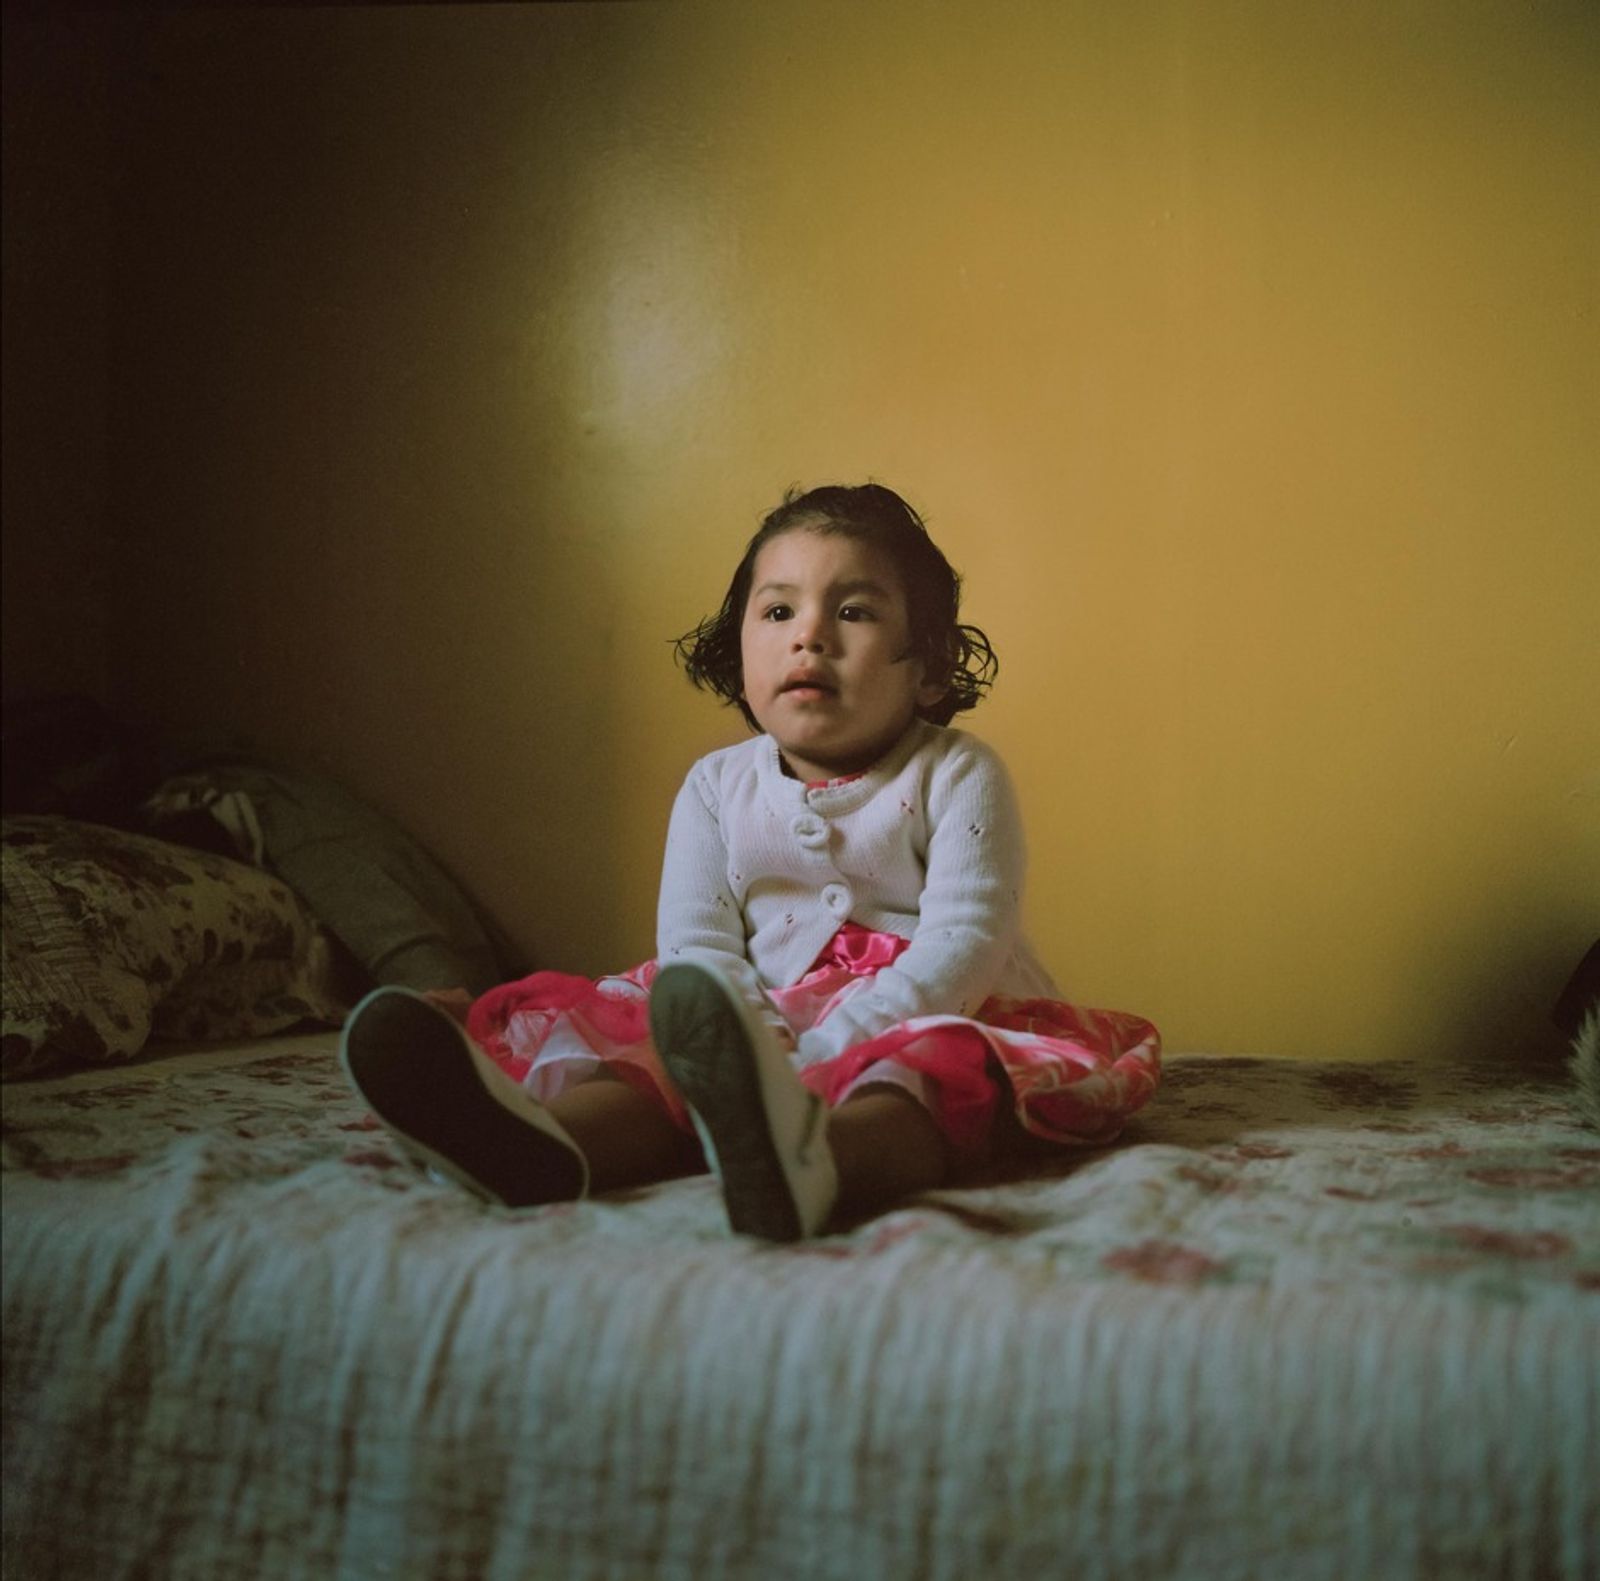 © Ruth Prieto - Lluvia sits on her bed with a pink dress bought for special occasions.